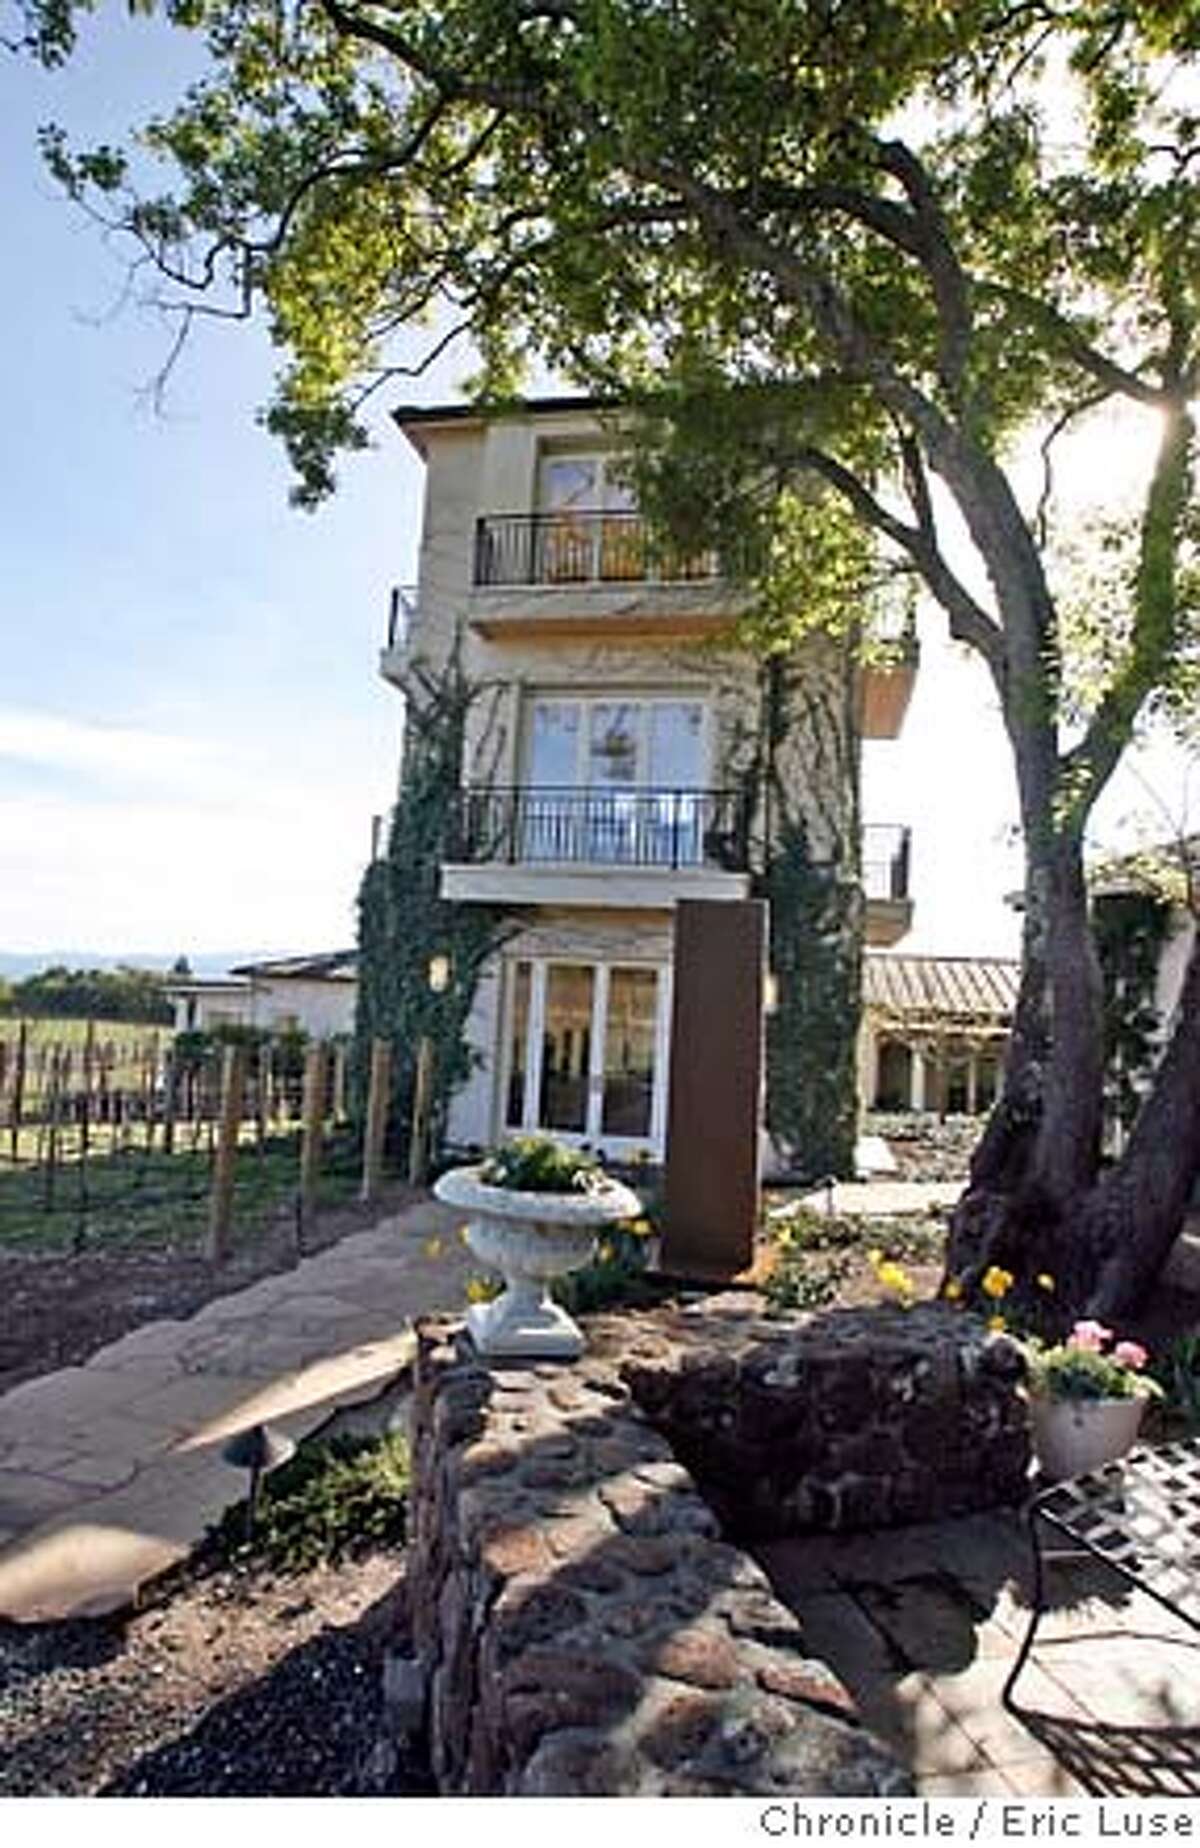 .JPG Craig's office tower has a sweeping view of the vineyards Craig and Kathryn Hall's home in Napa. Photographer: Eric Luse / The Chronicle names cq from source MANDATORY CREDIT FOR PHOTOG AND SF CHRONICLE/NO SALES-MAGS OUT